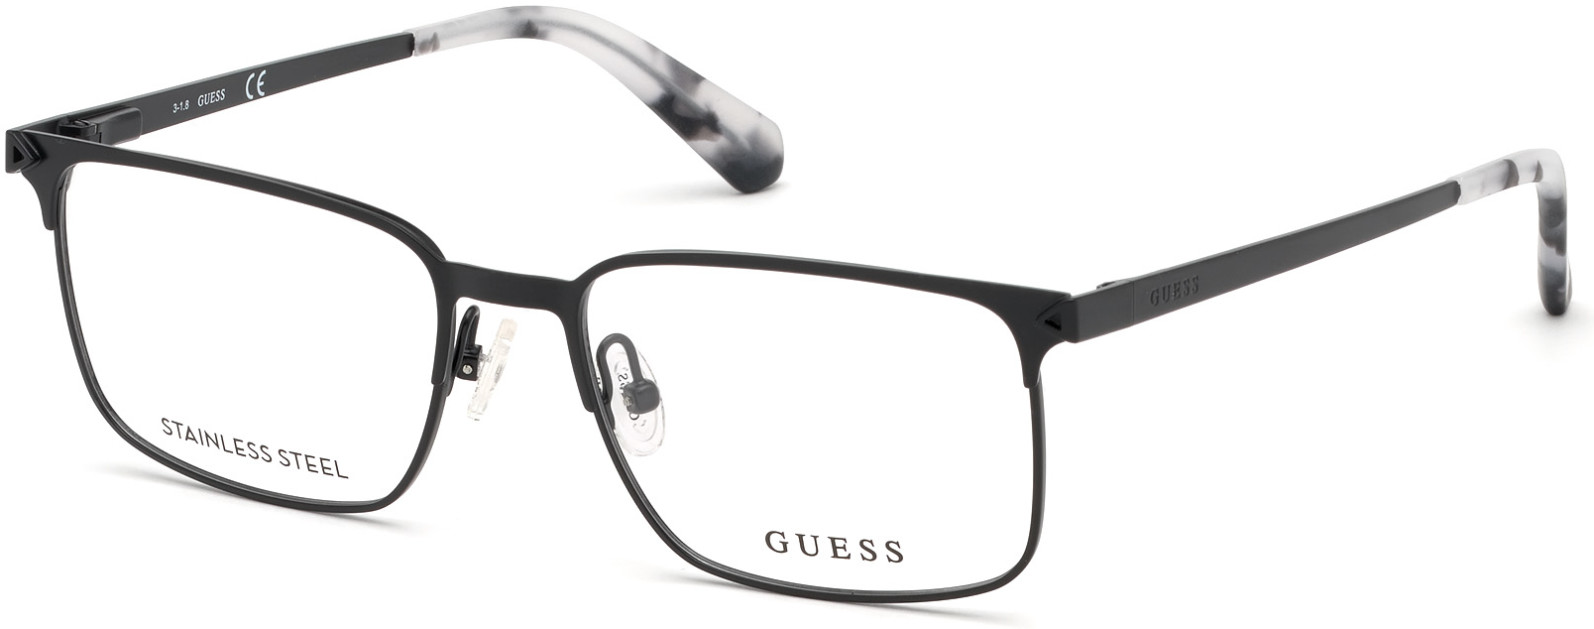 GUESS 1965 005